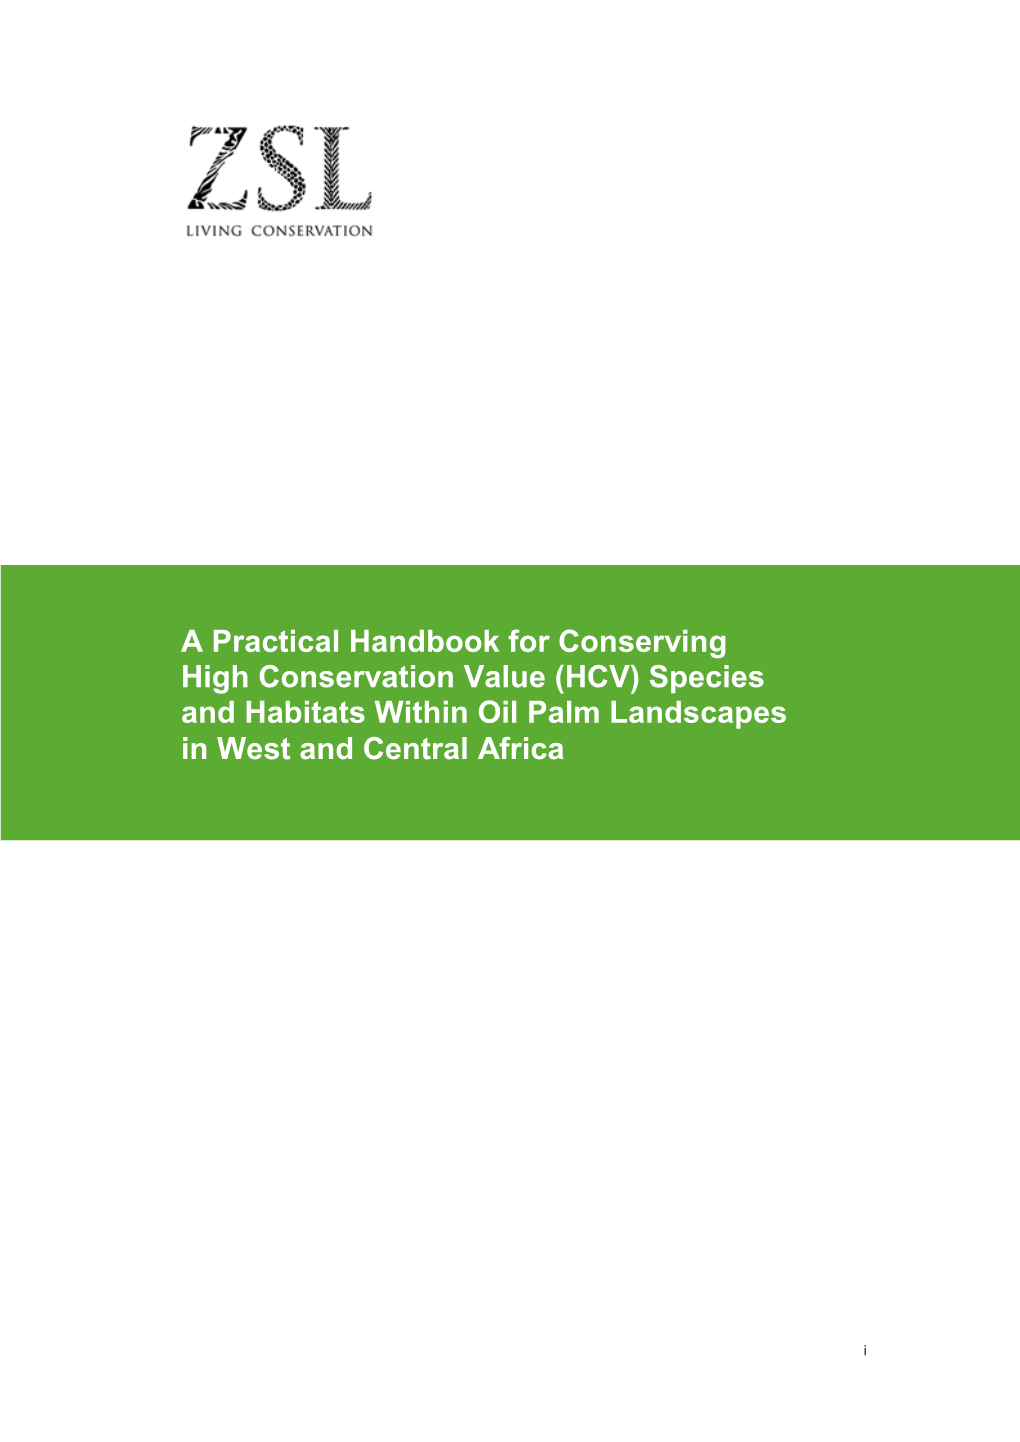 (HCV) Species and Habitats Within Oil Palm Landscapes in West and Central Africa